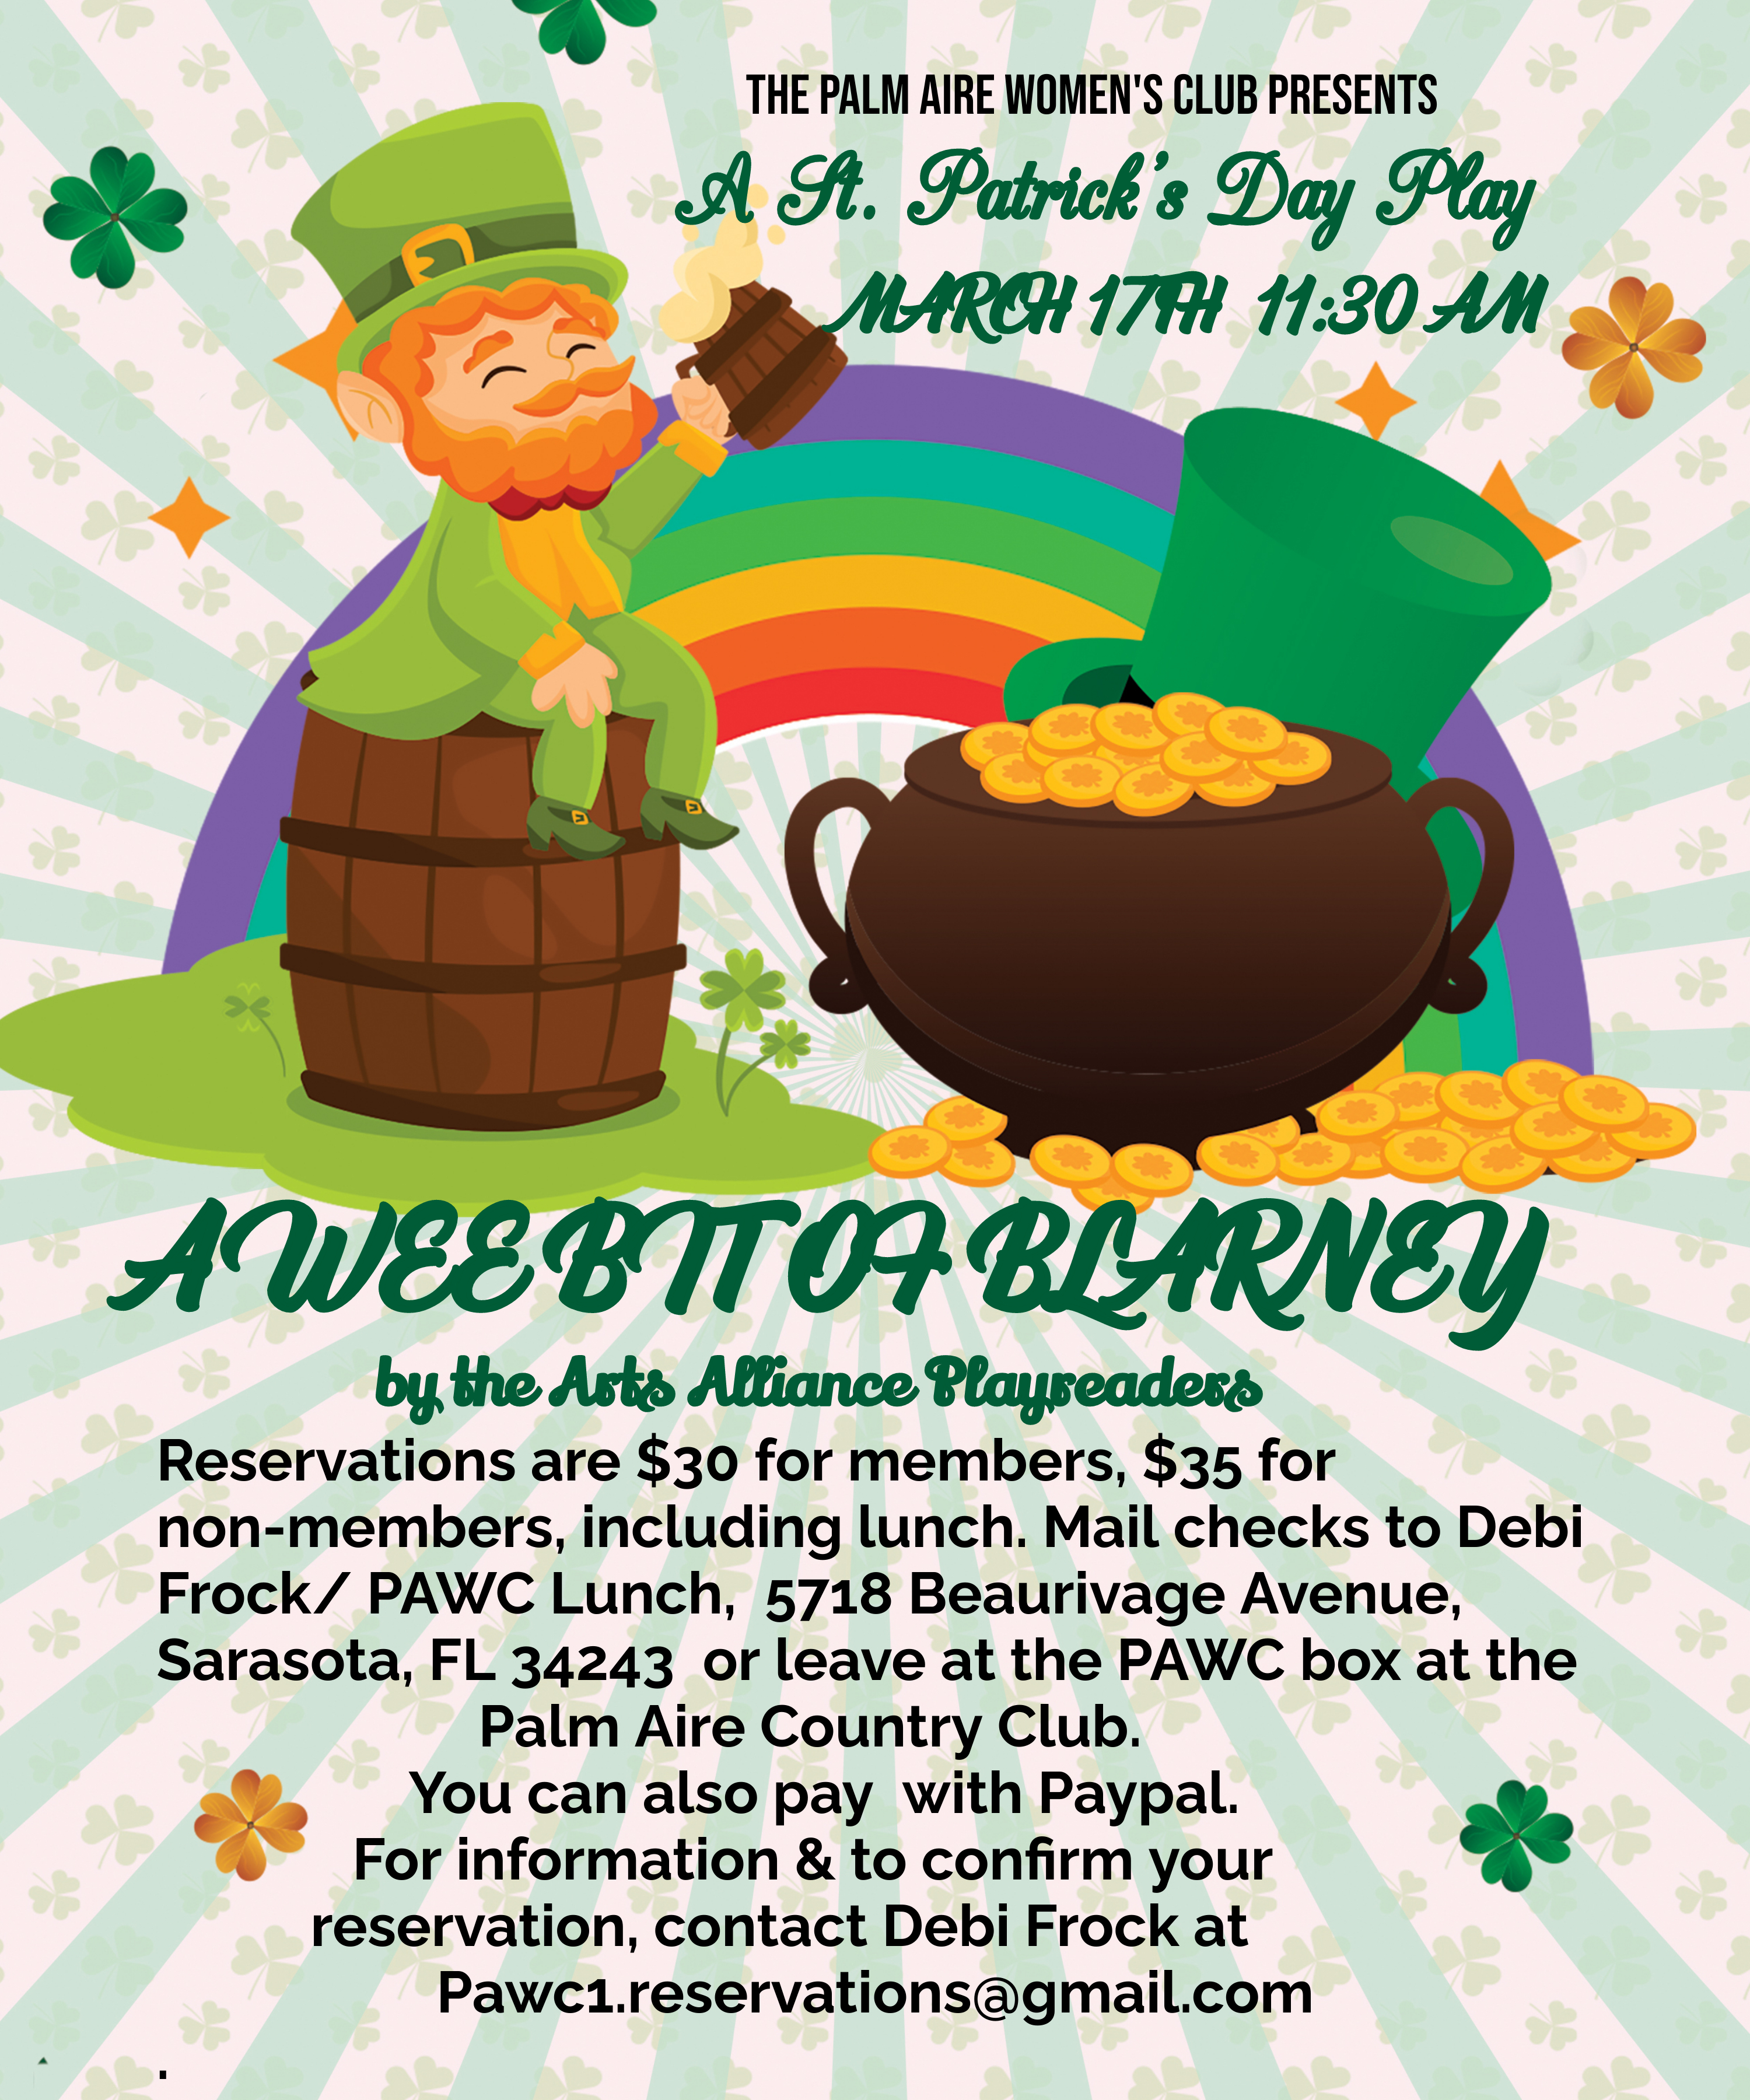 St. Patrick’s Day with a performance of "A WEE BIT OF BLARNEY"